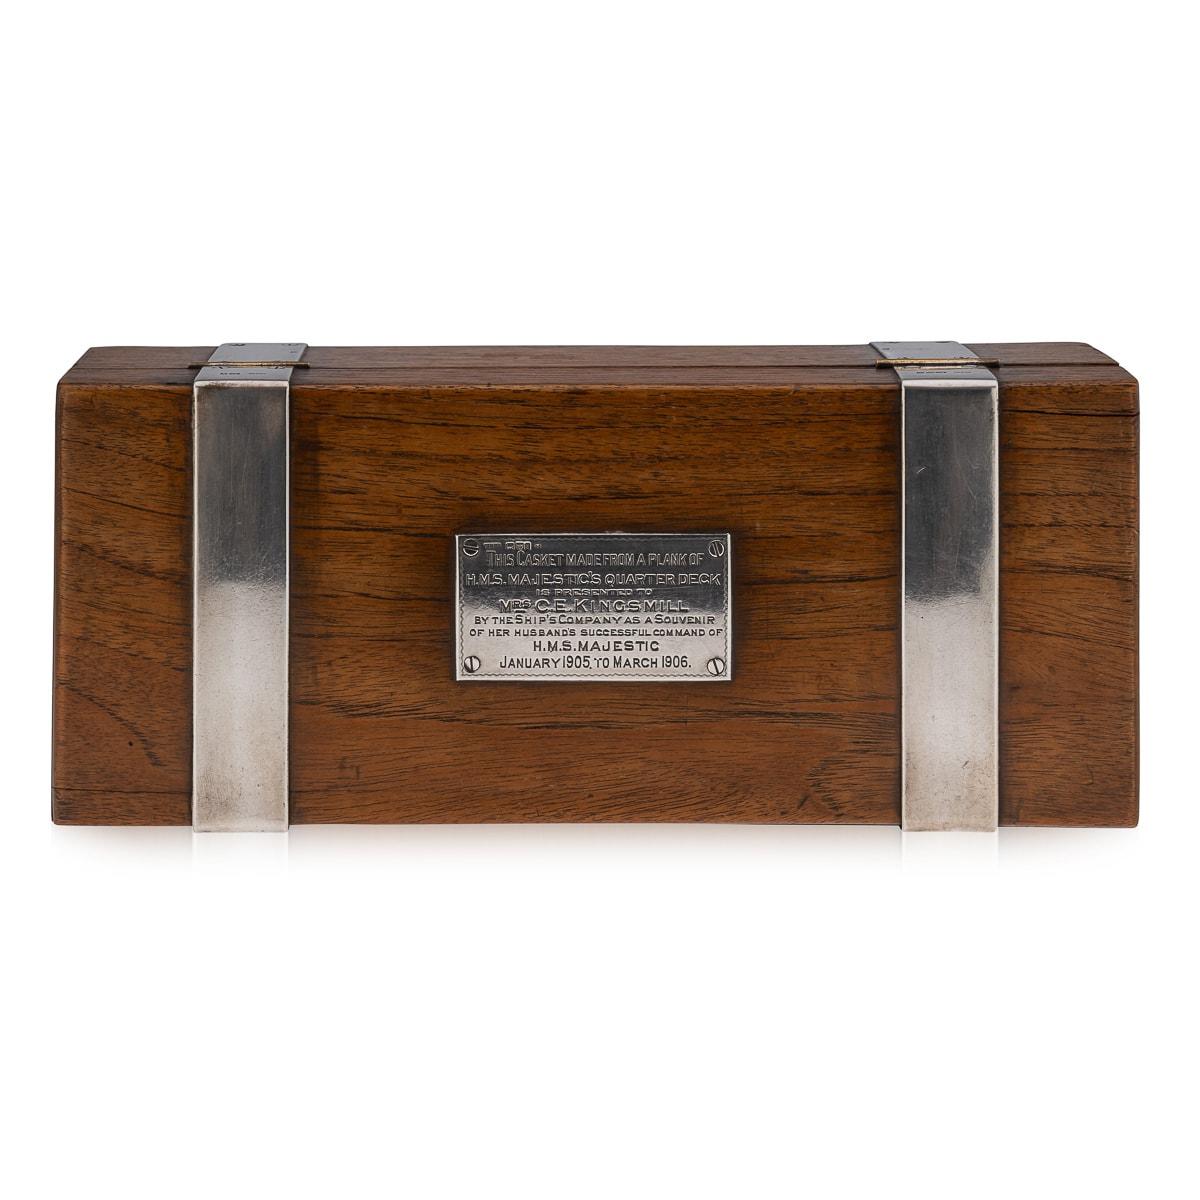 20th Century British Solid Silver & Wood 'H.M.S Majestic' Box, c.1905 For Sale 4